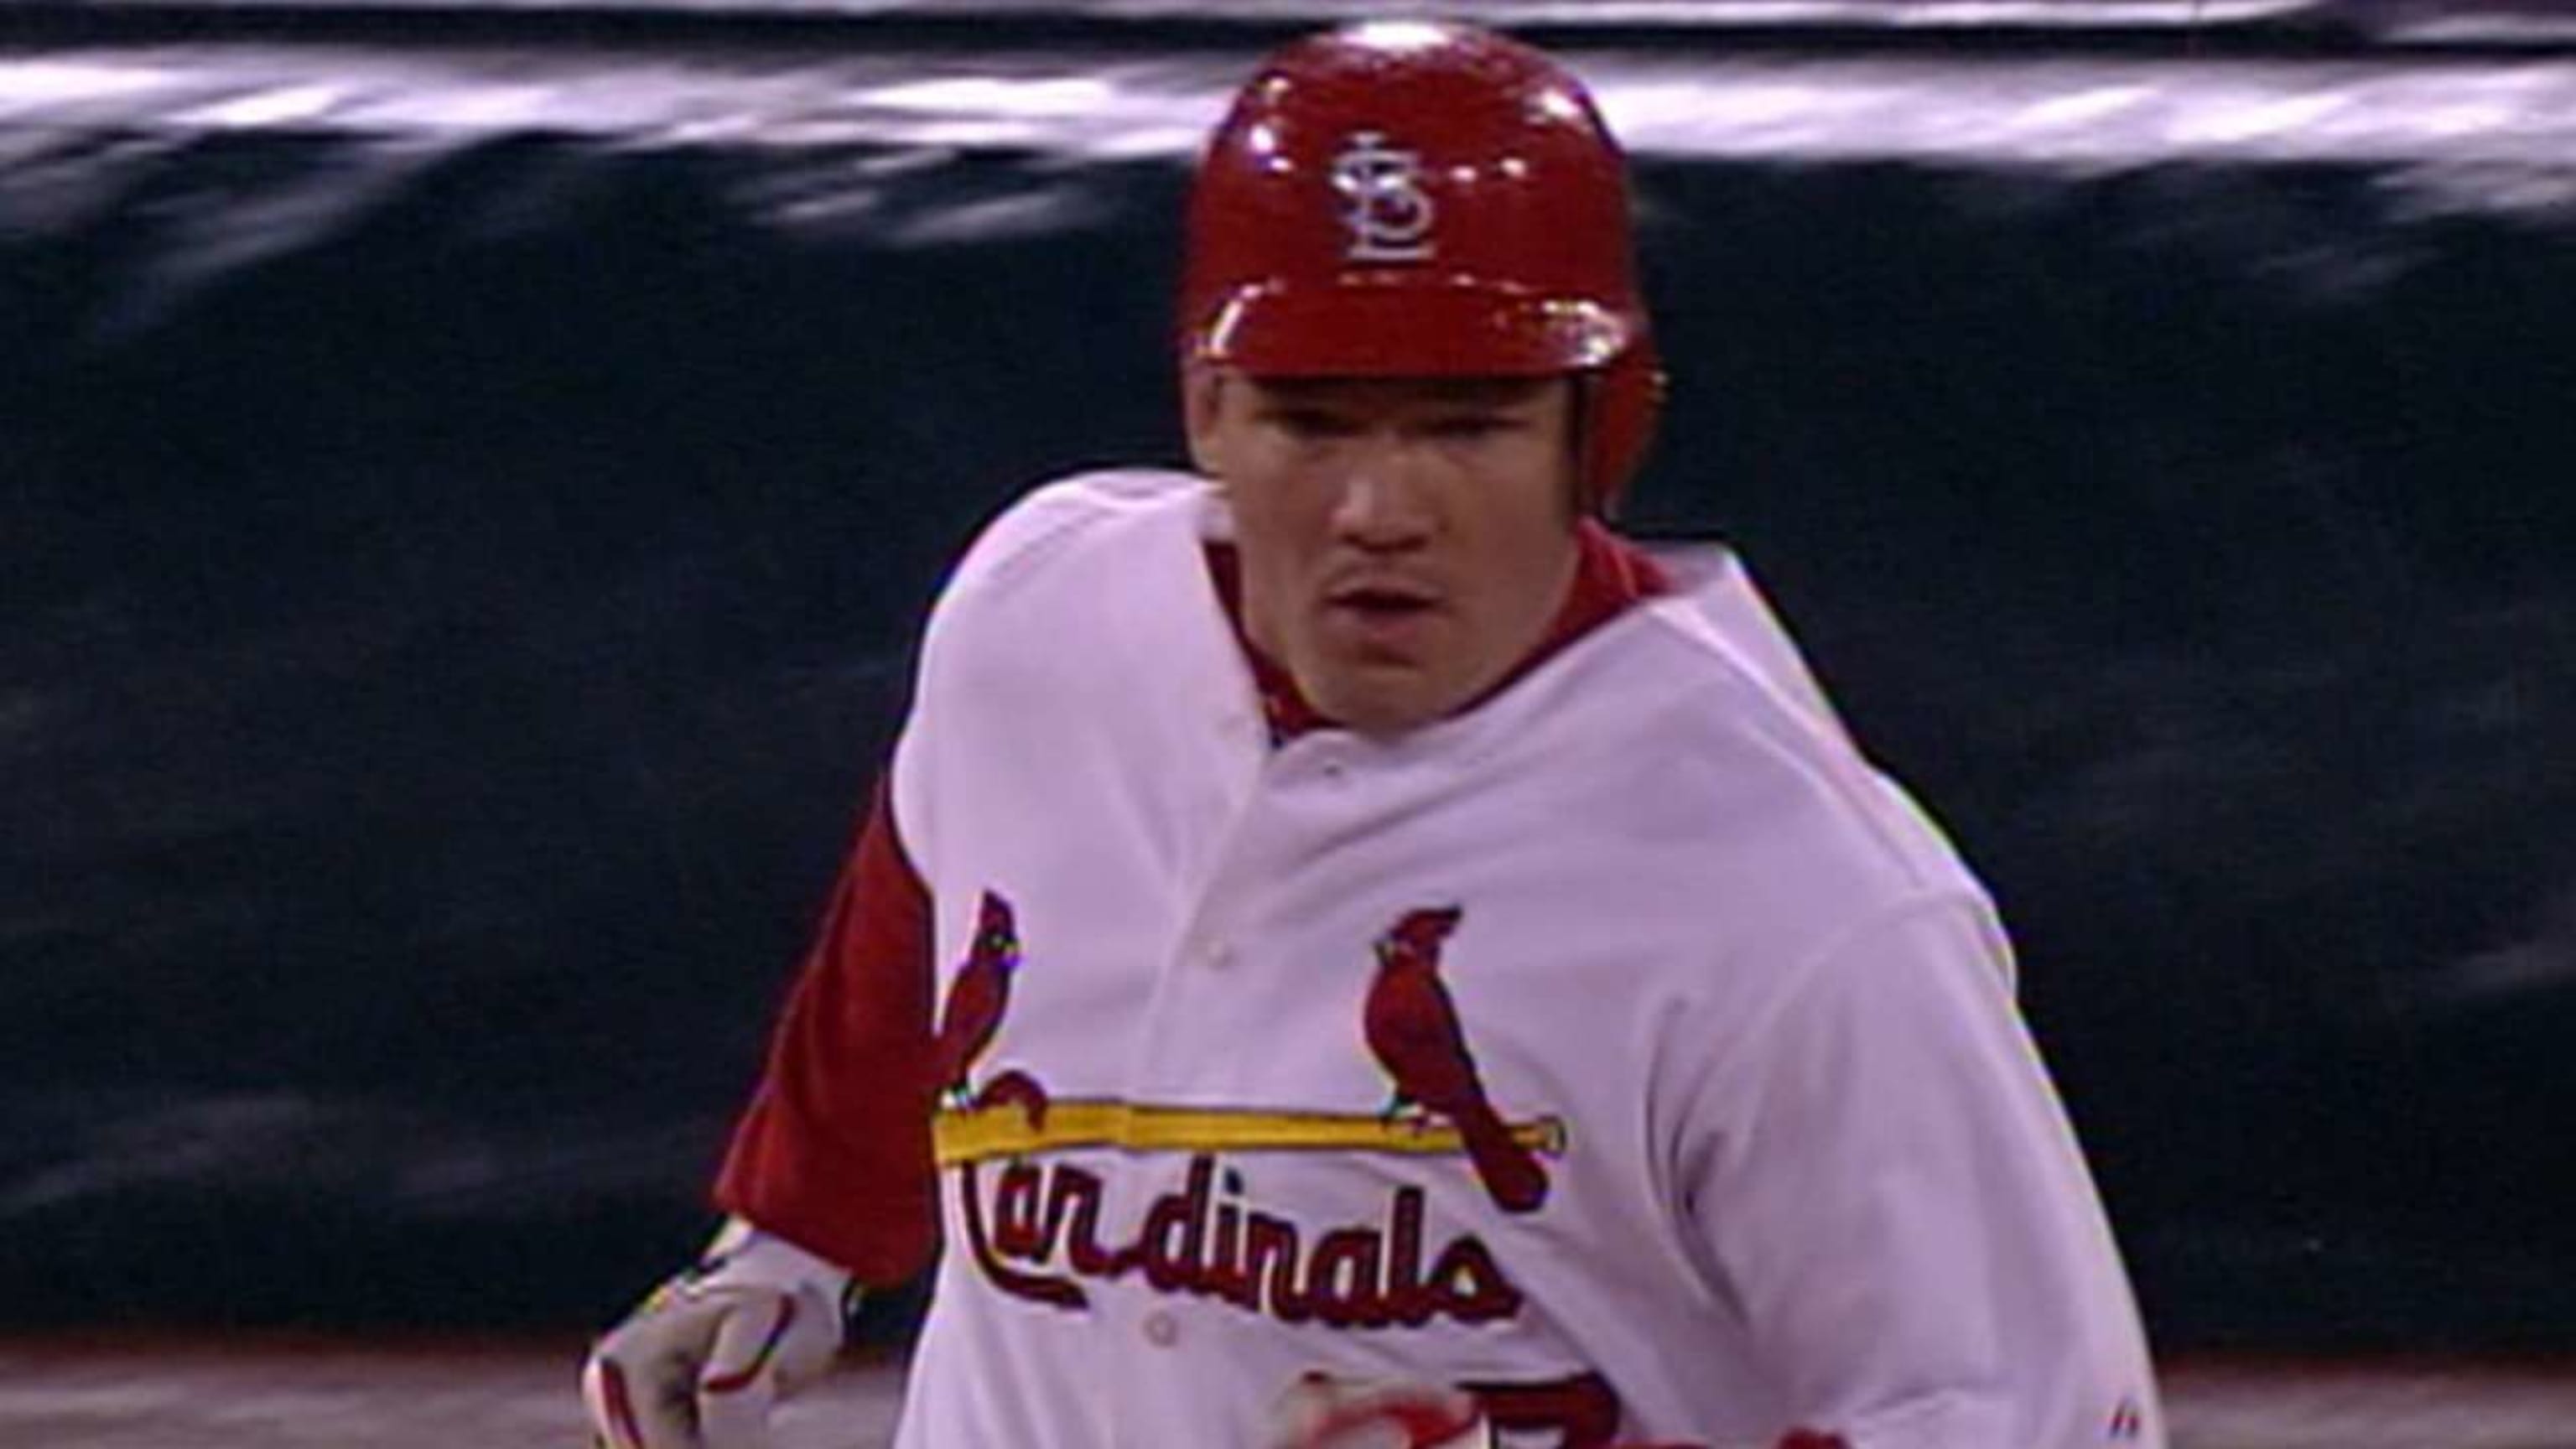 Rolen's two home runs in Game 2